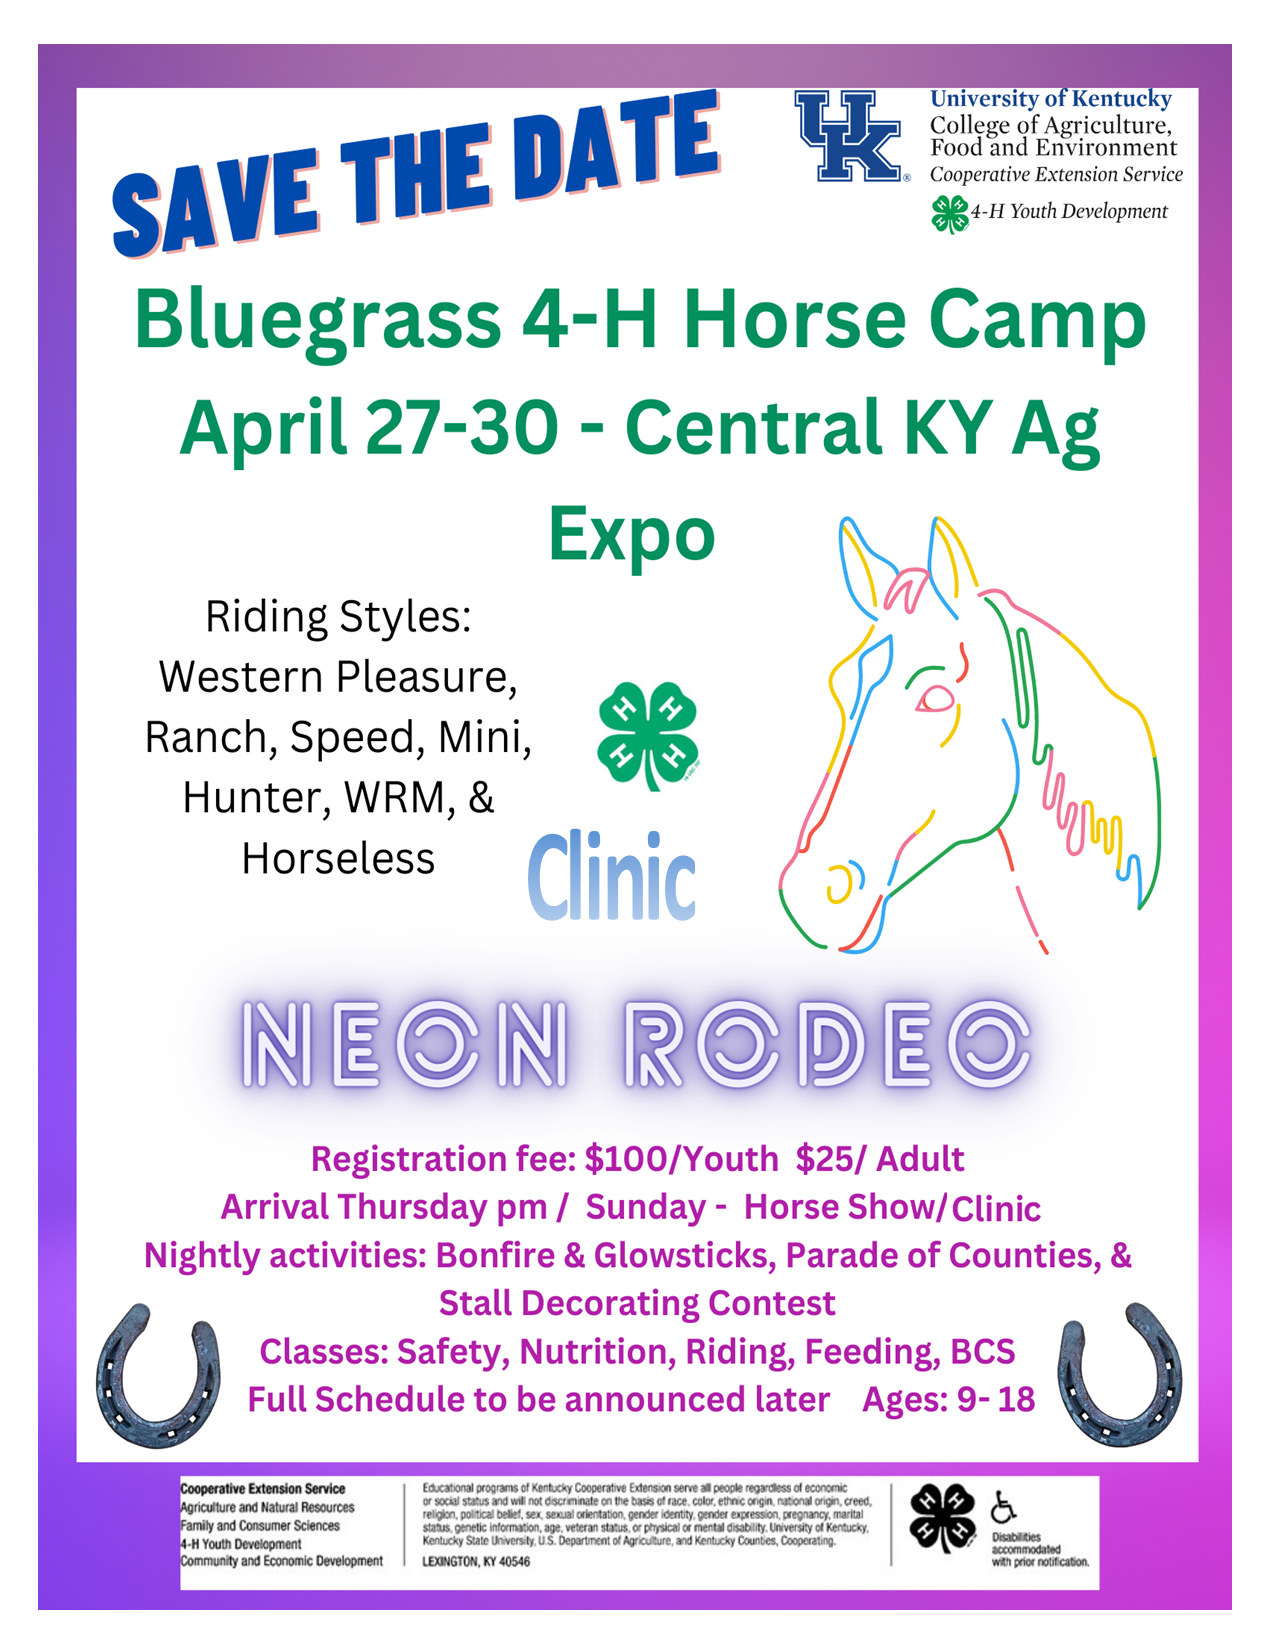 Horse head outline with save the date horse camp information 